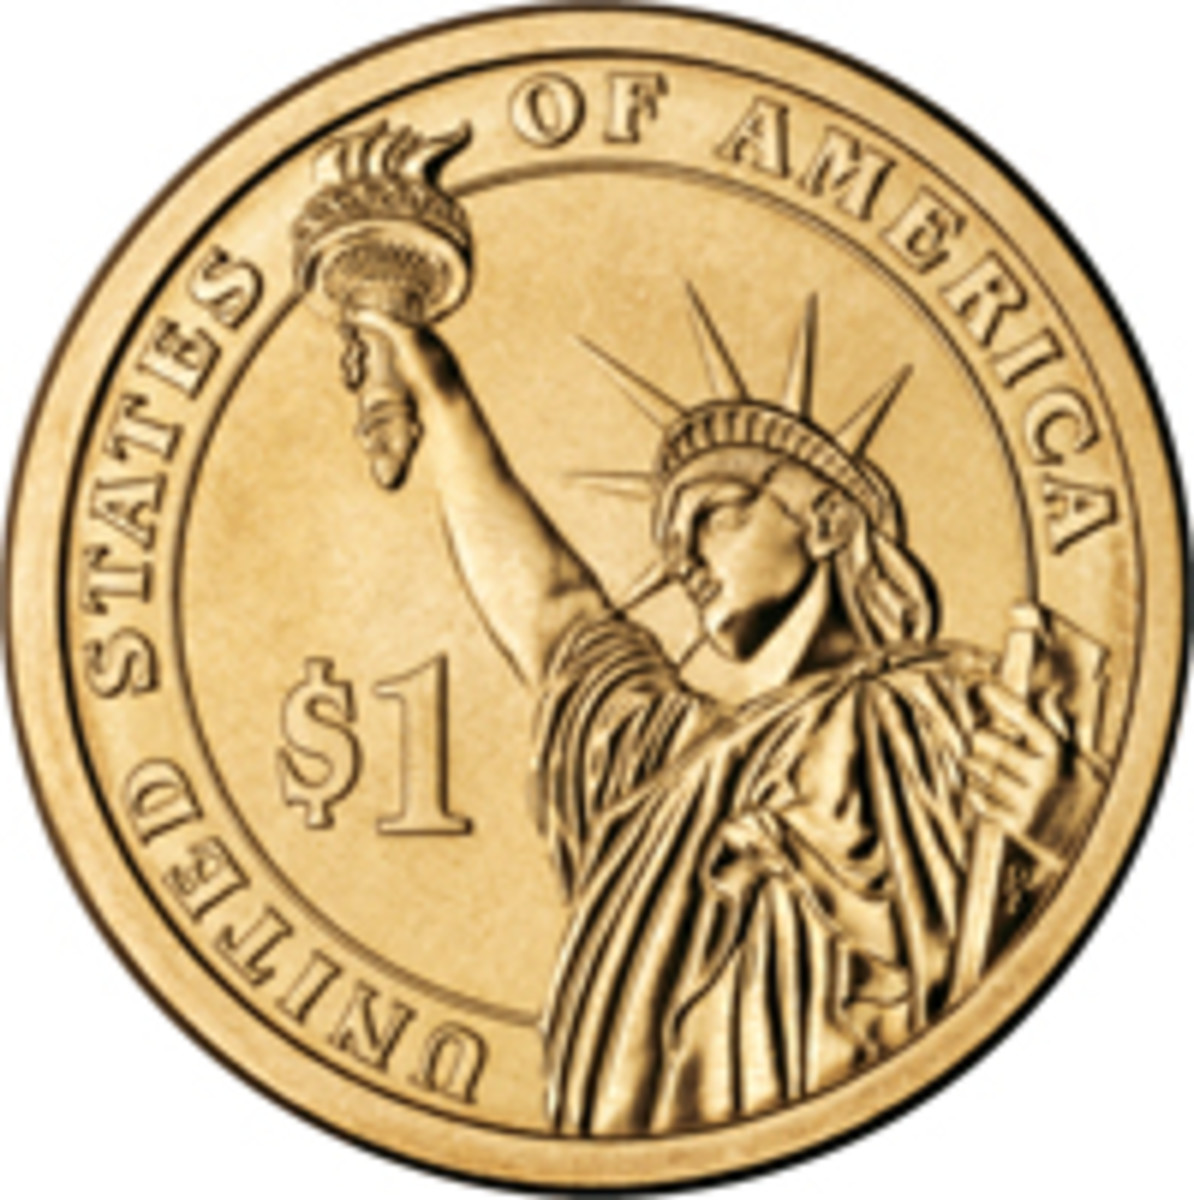 What four words are on all U.S. coins?